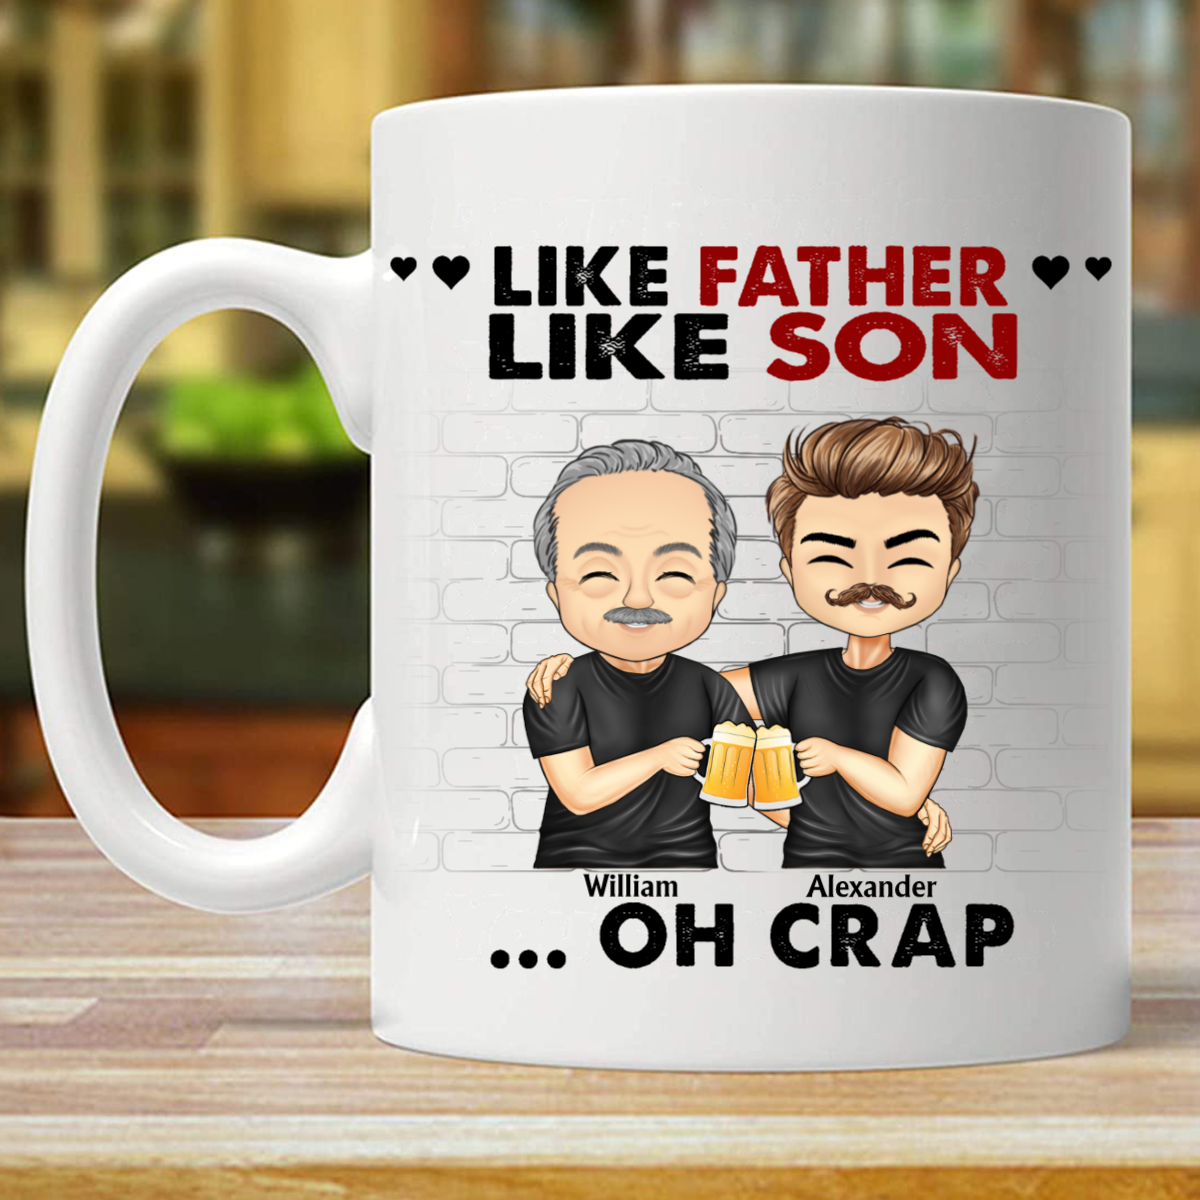 Like Father Like Daughter Son - Father Gift - Personalized Mug (Double-sided Printing)